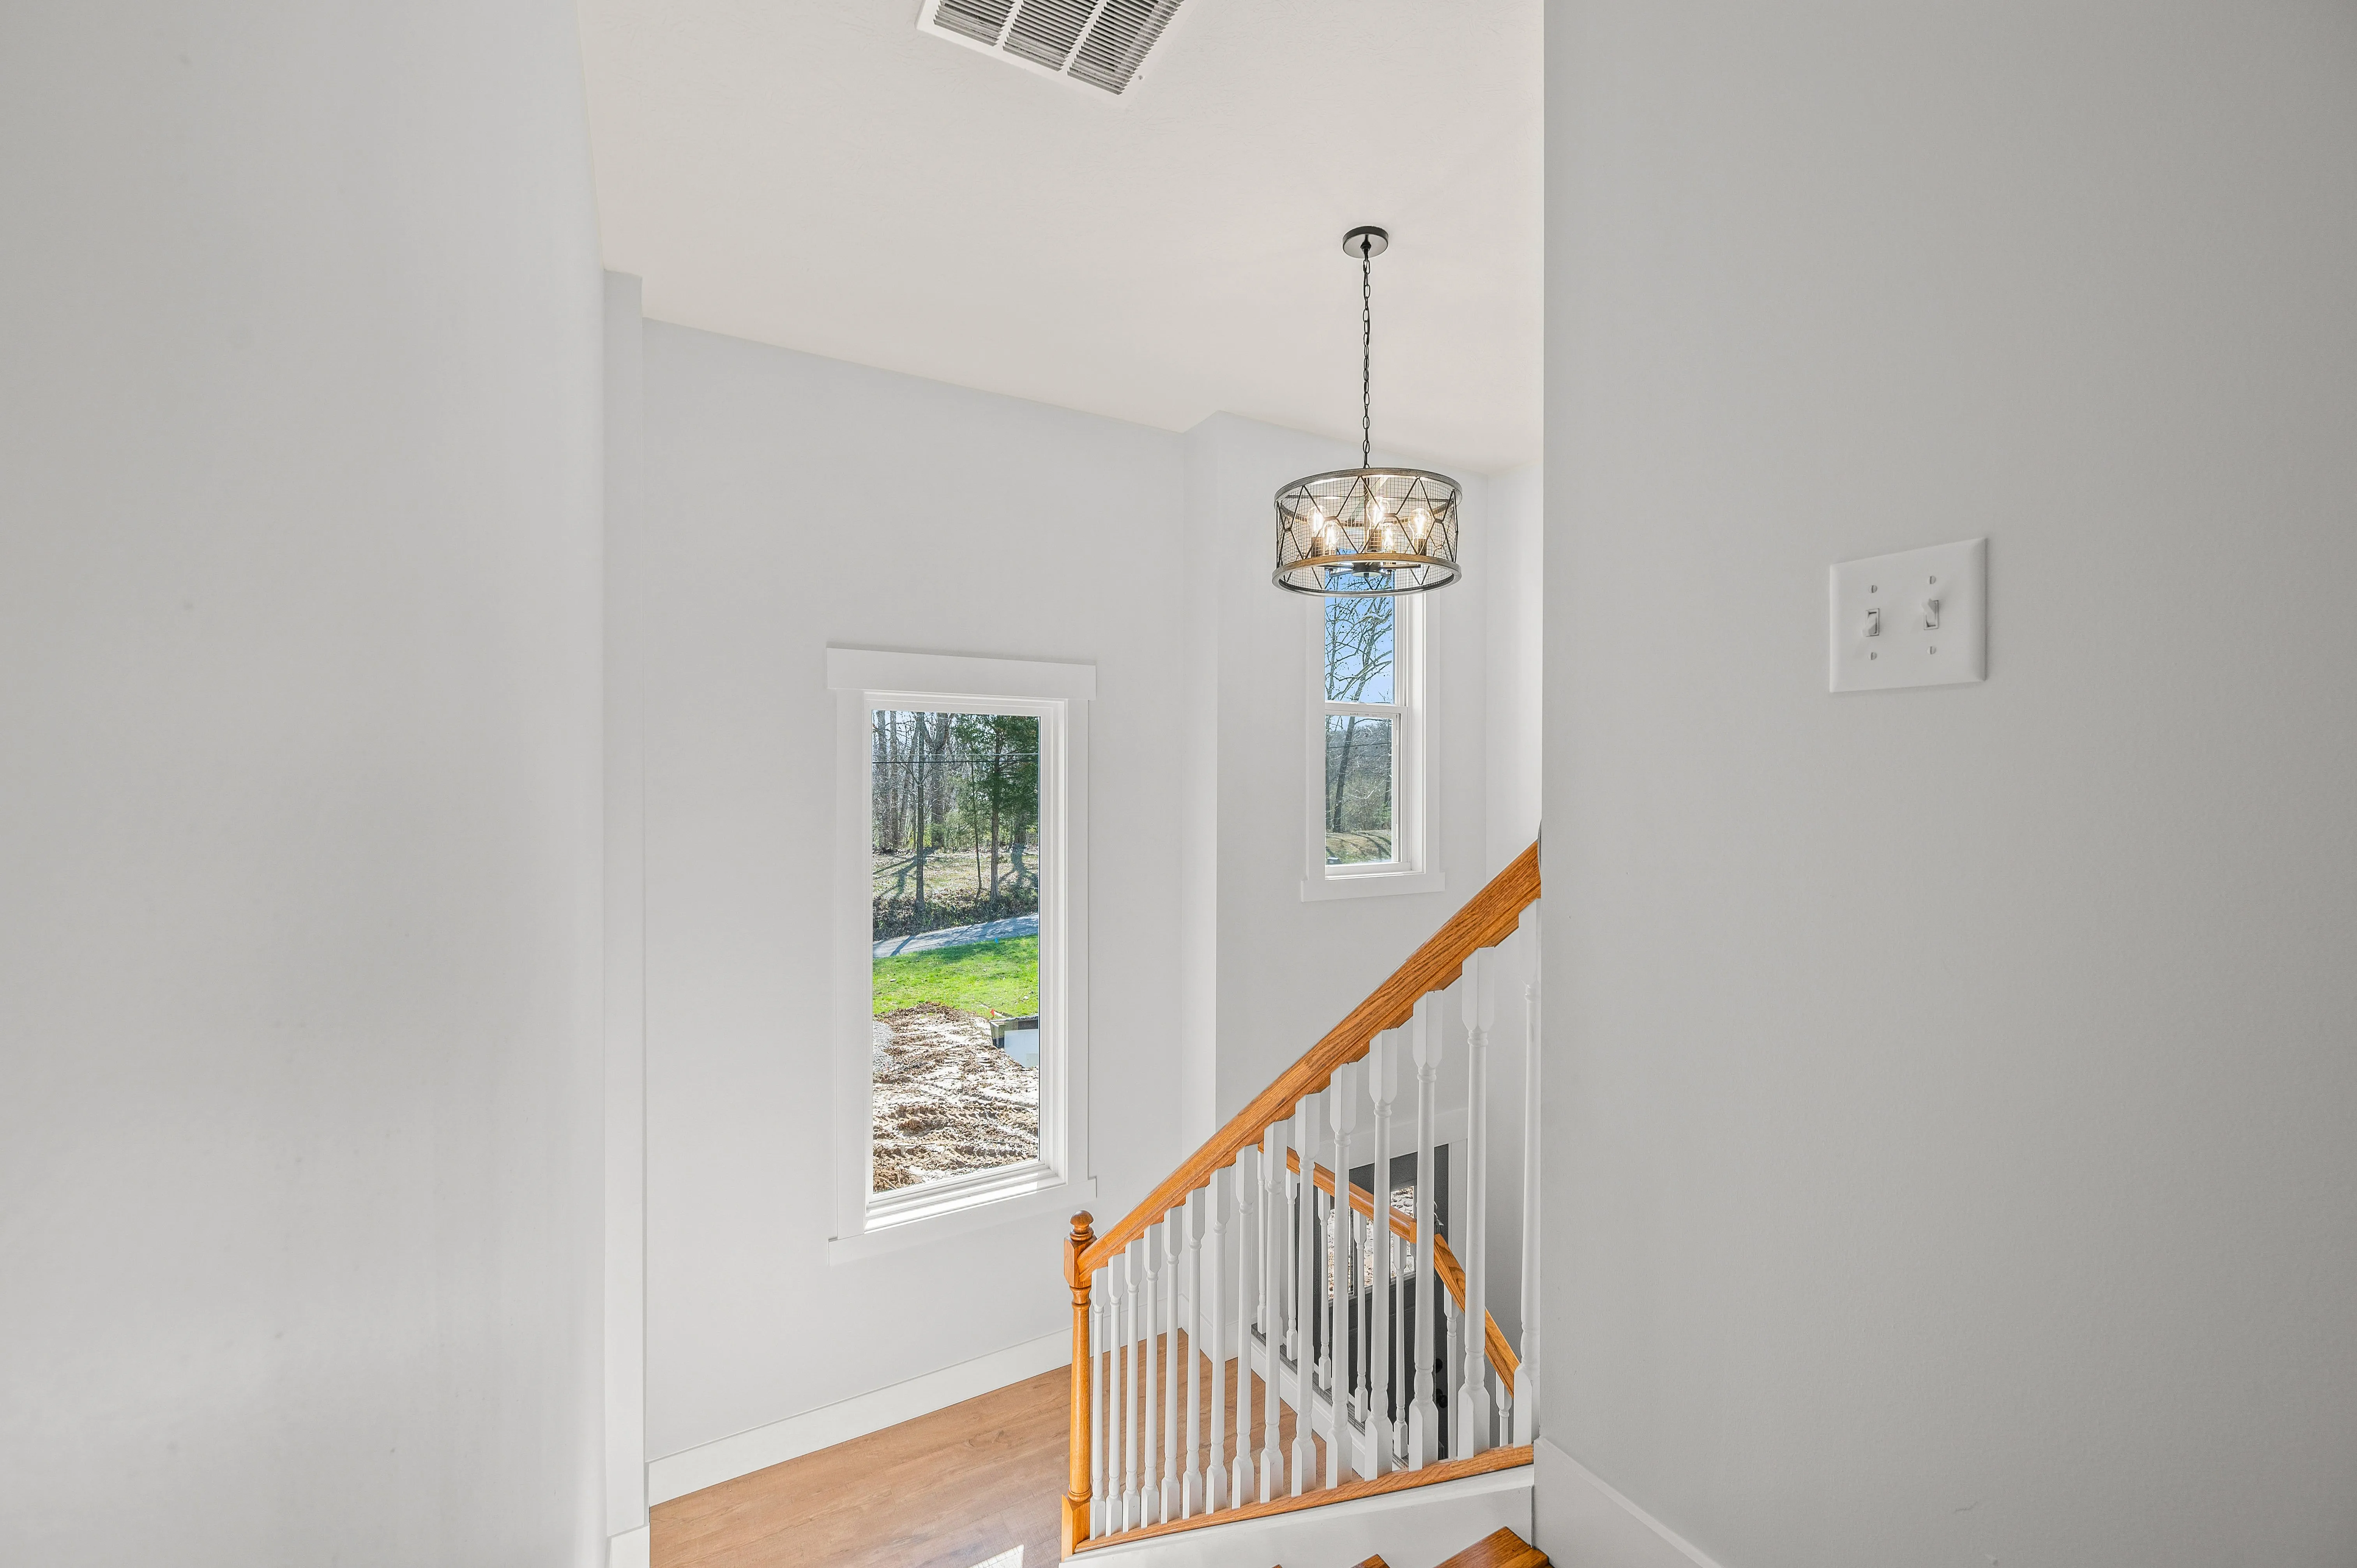 Brightly lit interior stairwell with wooden banister, geometric light fixture, and view of trees through window.